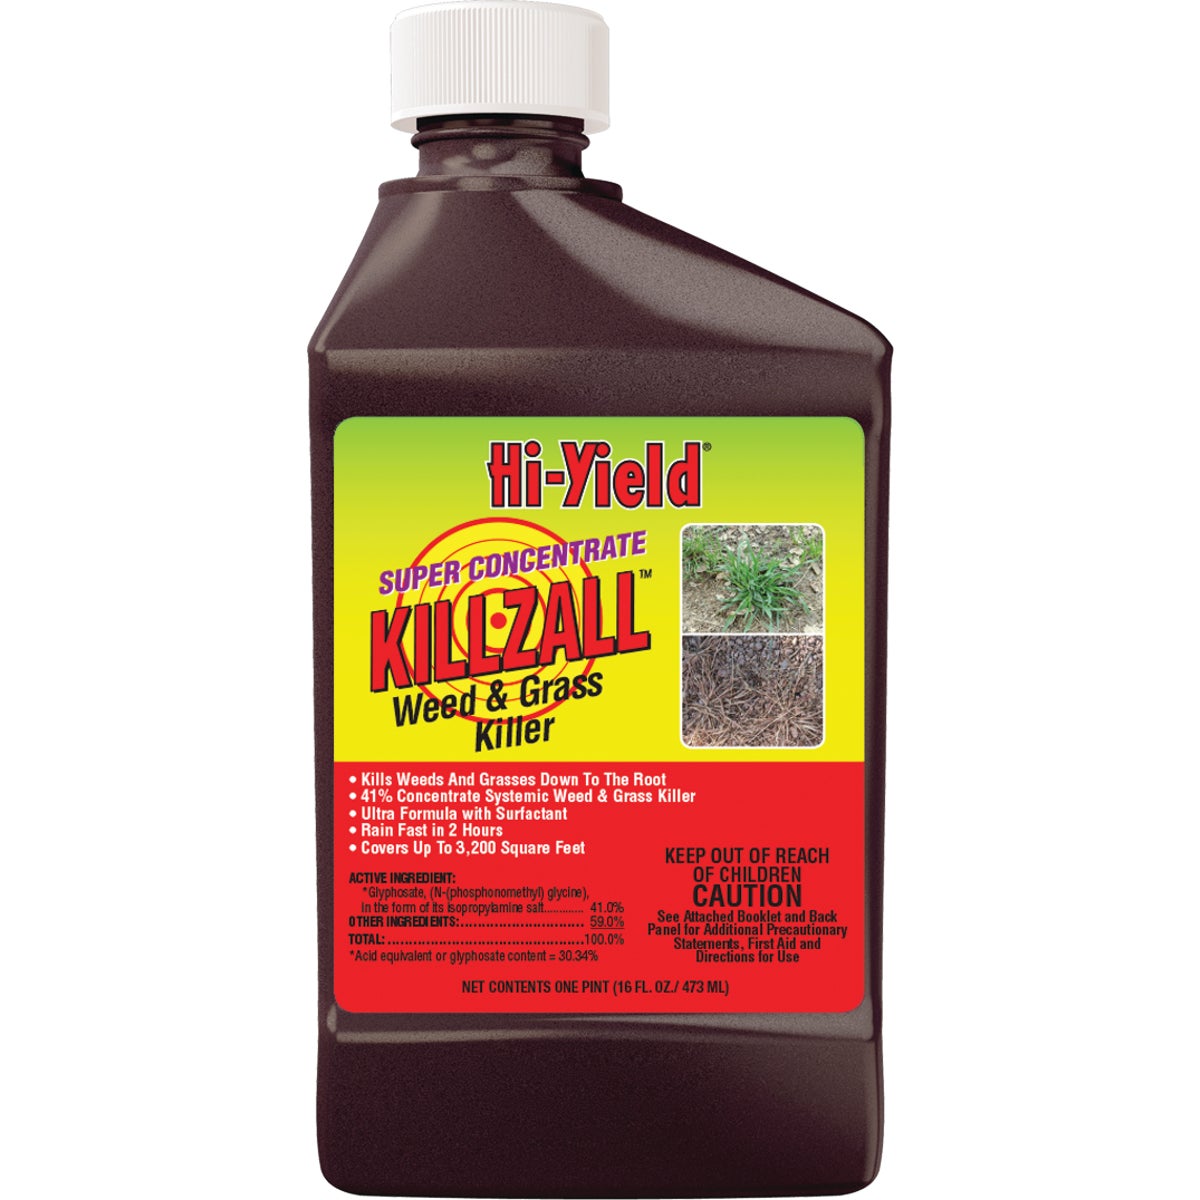 Item 700739, Super concentrate, Non-selective weed and grass killer contains a double 